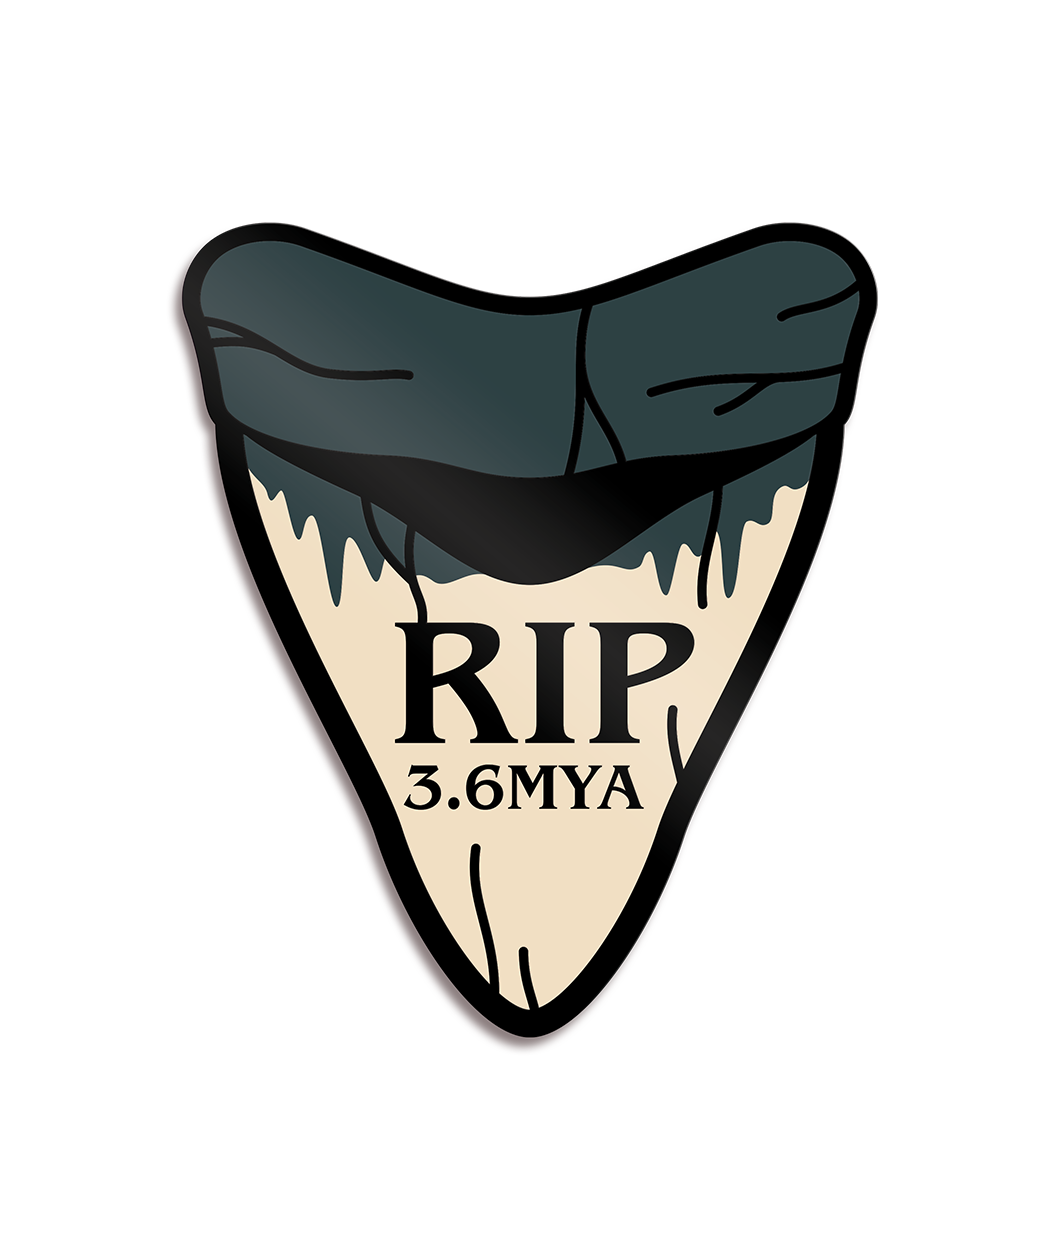 Megalodon tooth with black border and tan fill with dark gray on top. Black wavy are drawn on tooth throughout. “RIP 3.6 MYA) is written in black sans serif font on the tan part of the tooth - from Eons